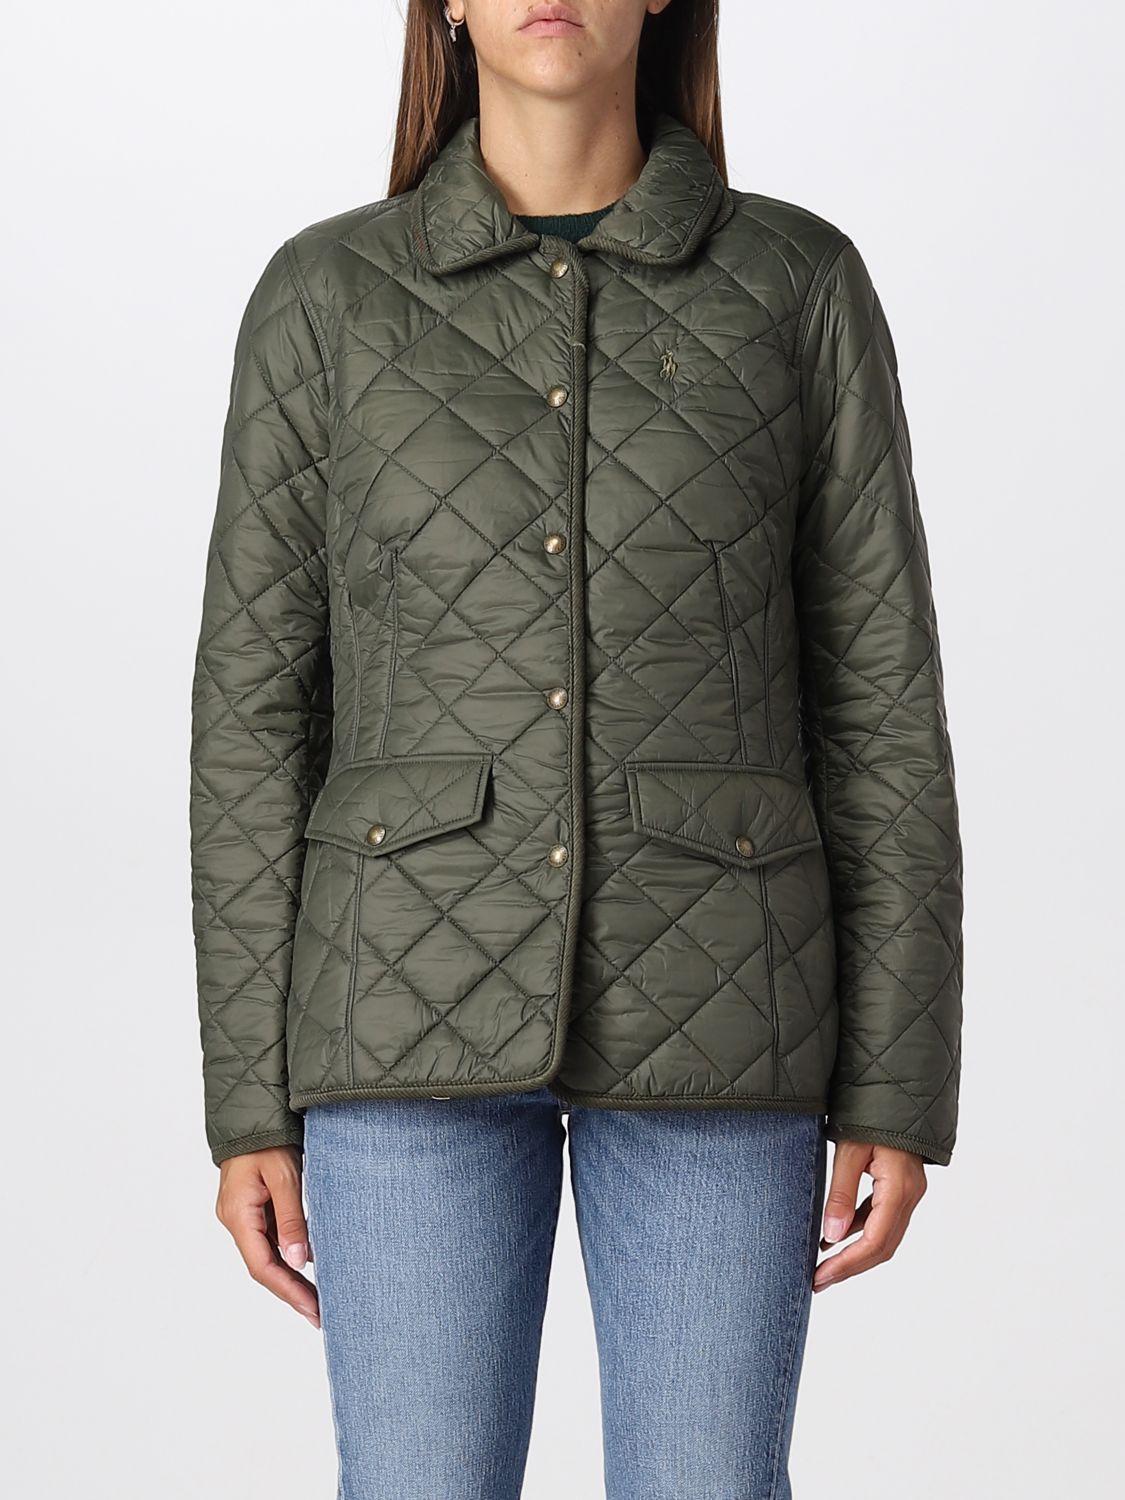 POLO RALPH LAUREN jacket for woman Olive Polo Ralph Lauren jacket